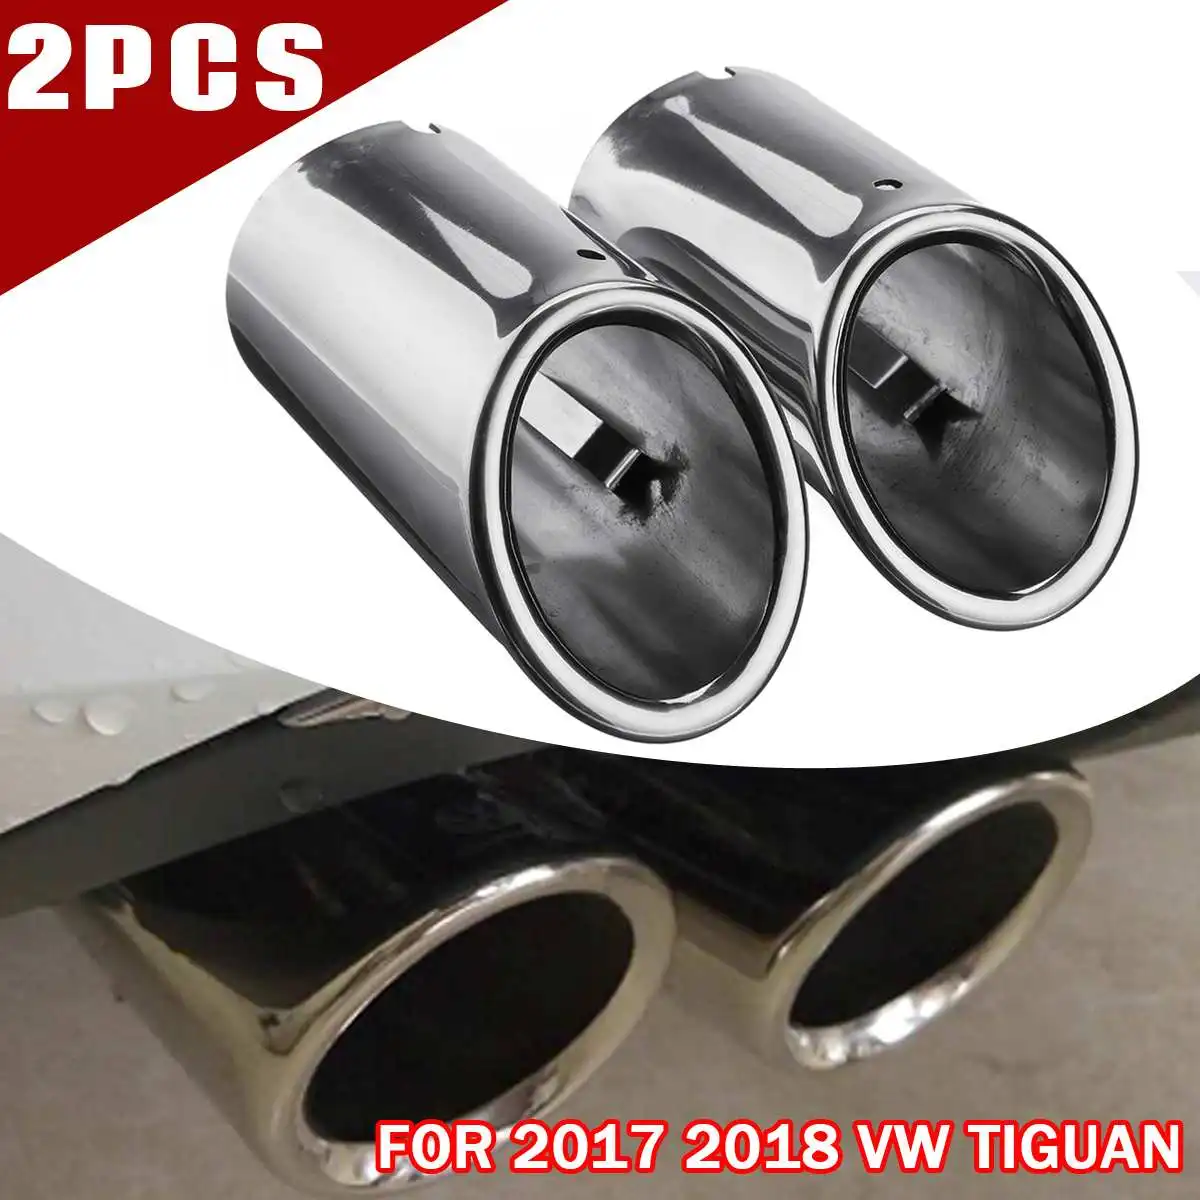 

Autoleader 2Pcs Muffler for VW for Tiguan 2017 2018 68mm Stainless Steel Rear Car Exhaust Muffler Tip Tail Pipe Auto Decor Trim